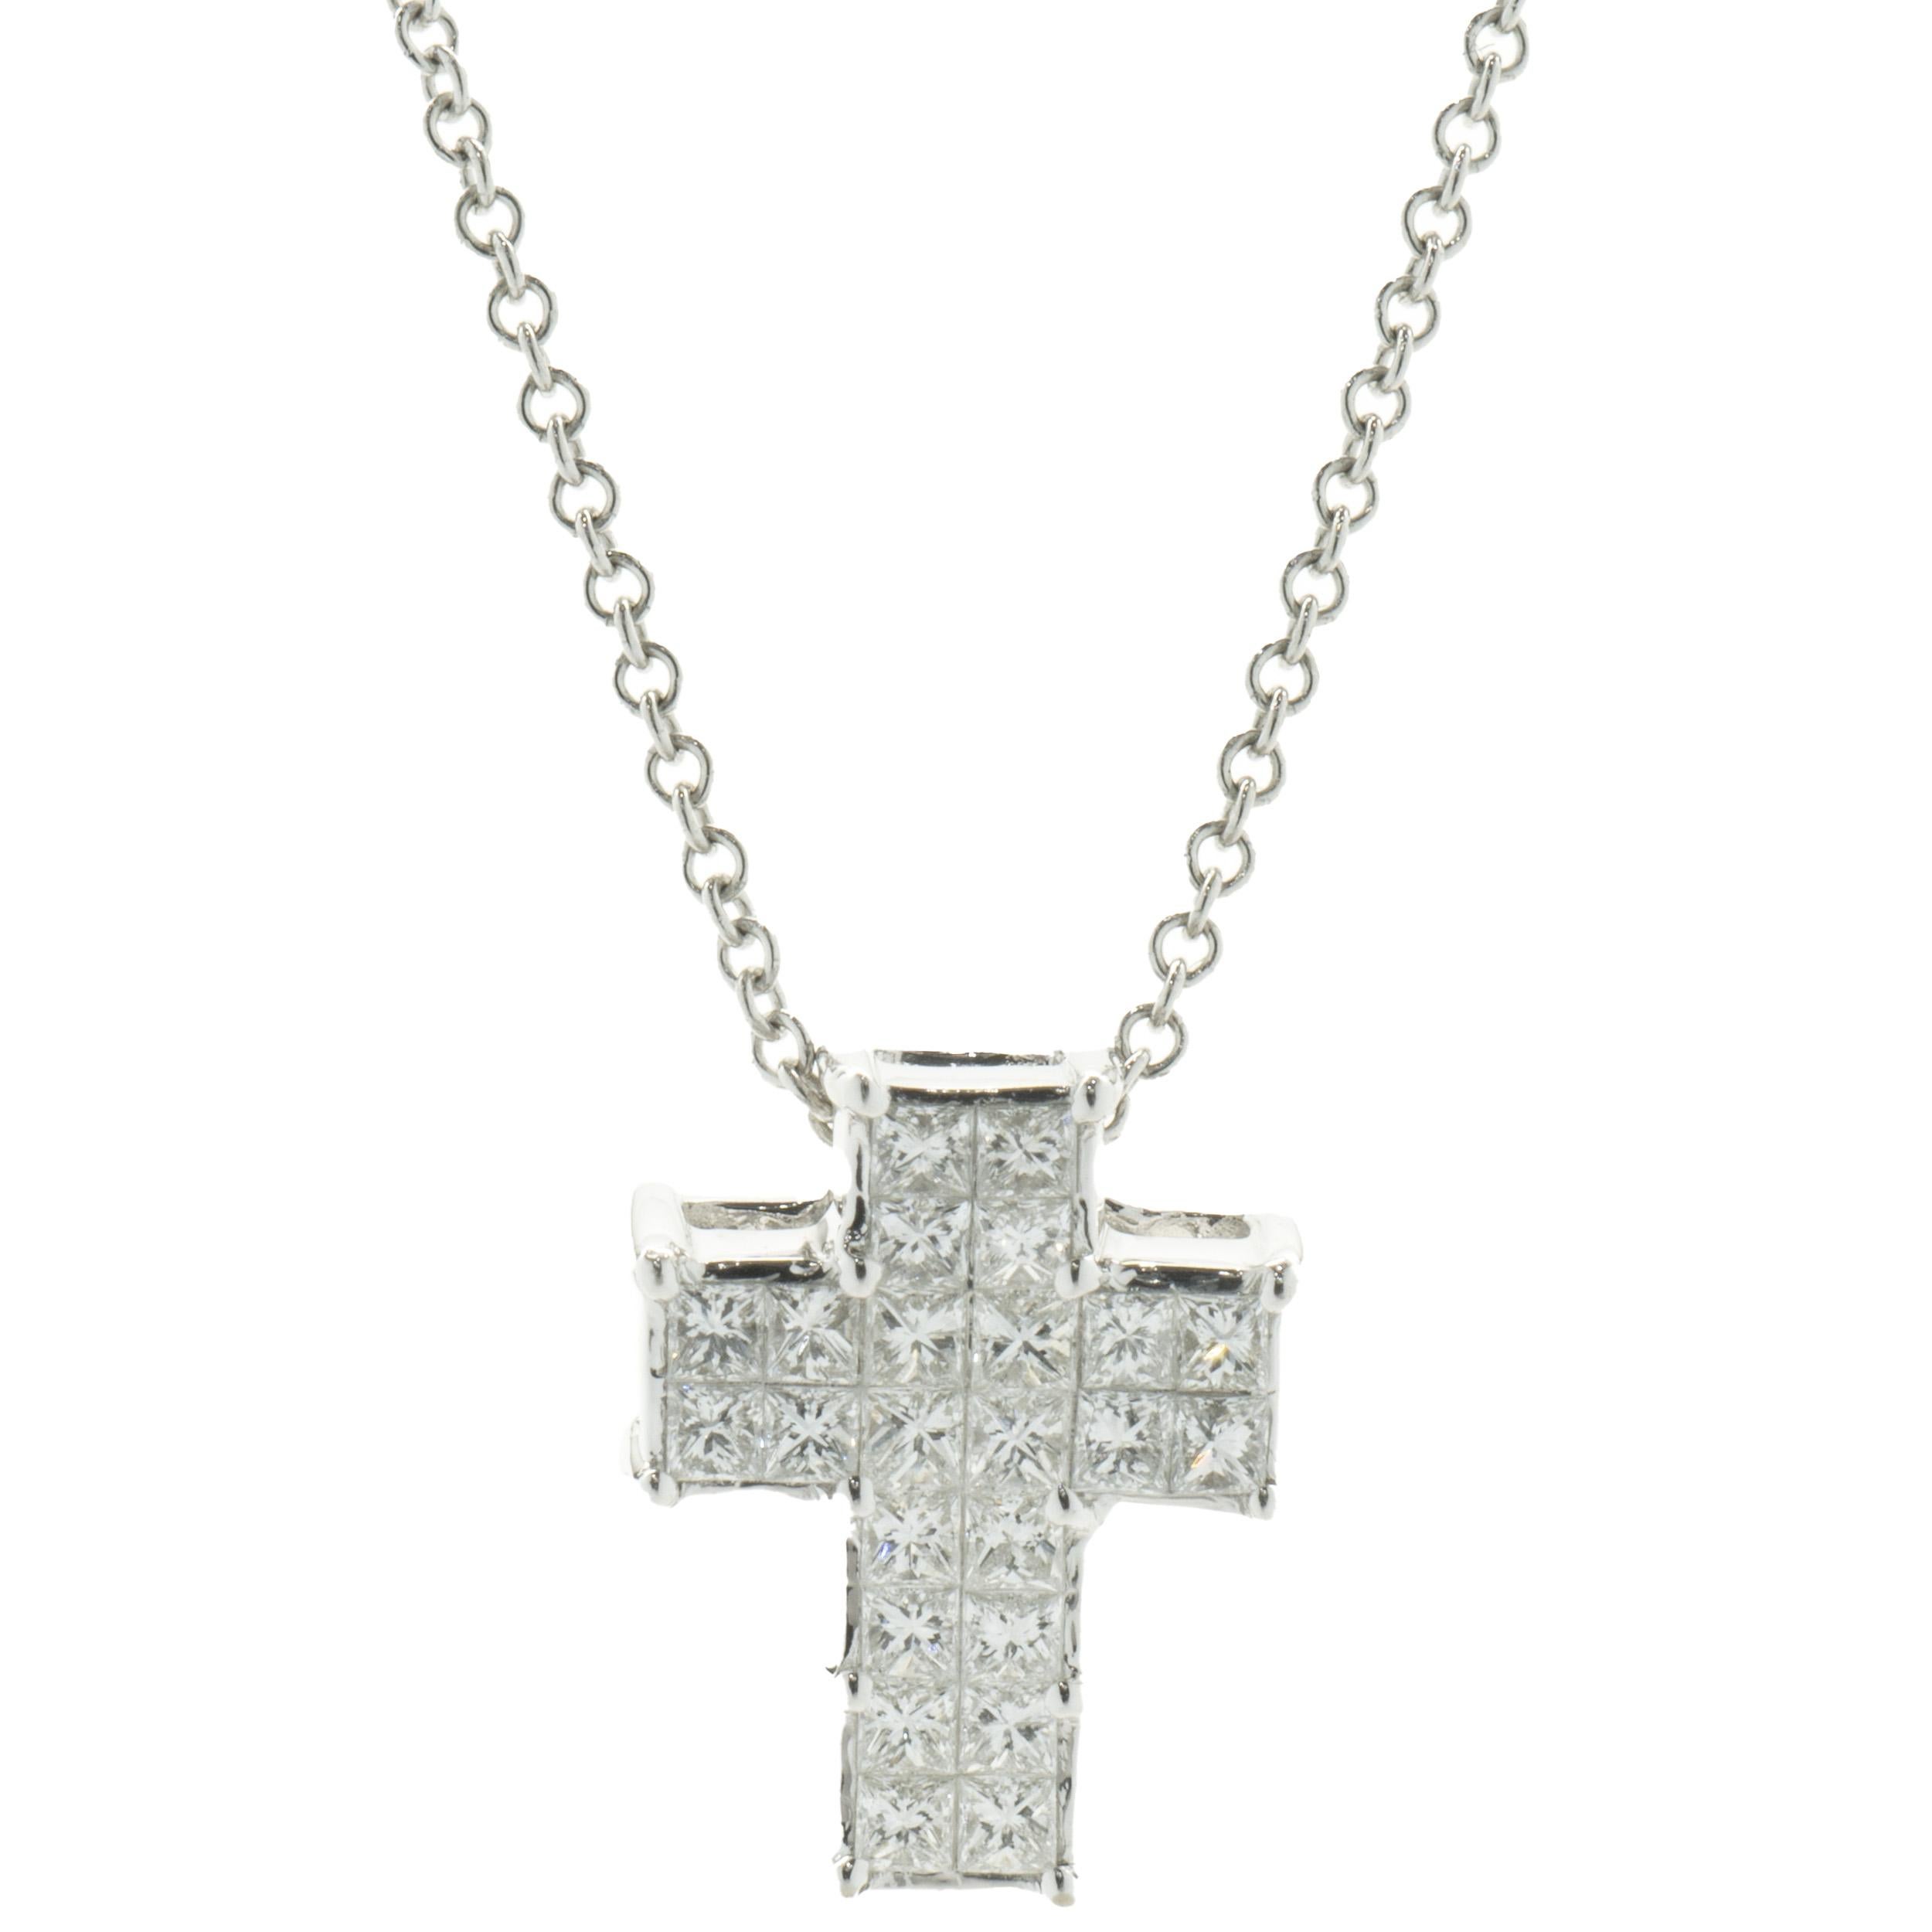 Designer: custom
Material: 18K white gold
Diamonds: 24 princess cut = 0.70cttw
Color: H
Clarity: SI1
Dimensions: necklace measures 18-inches in length 
Weight: 3.10 grams
